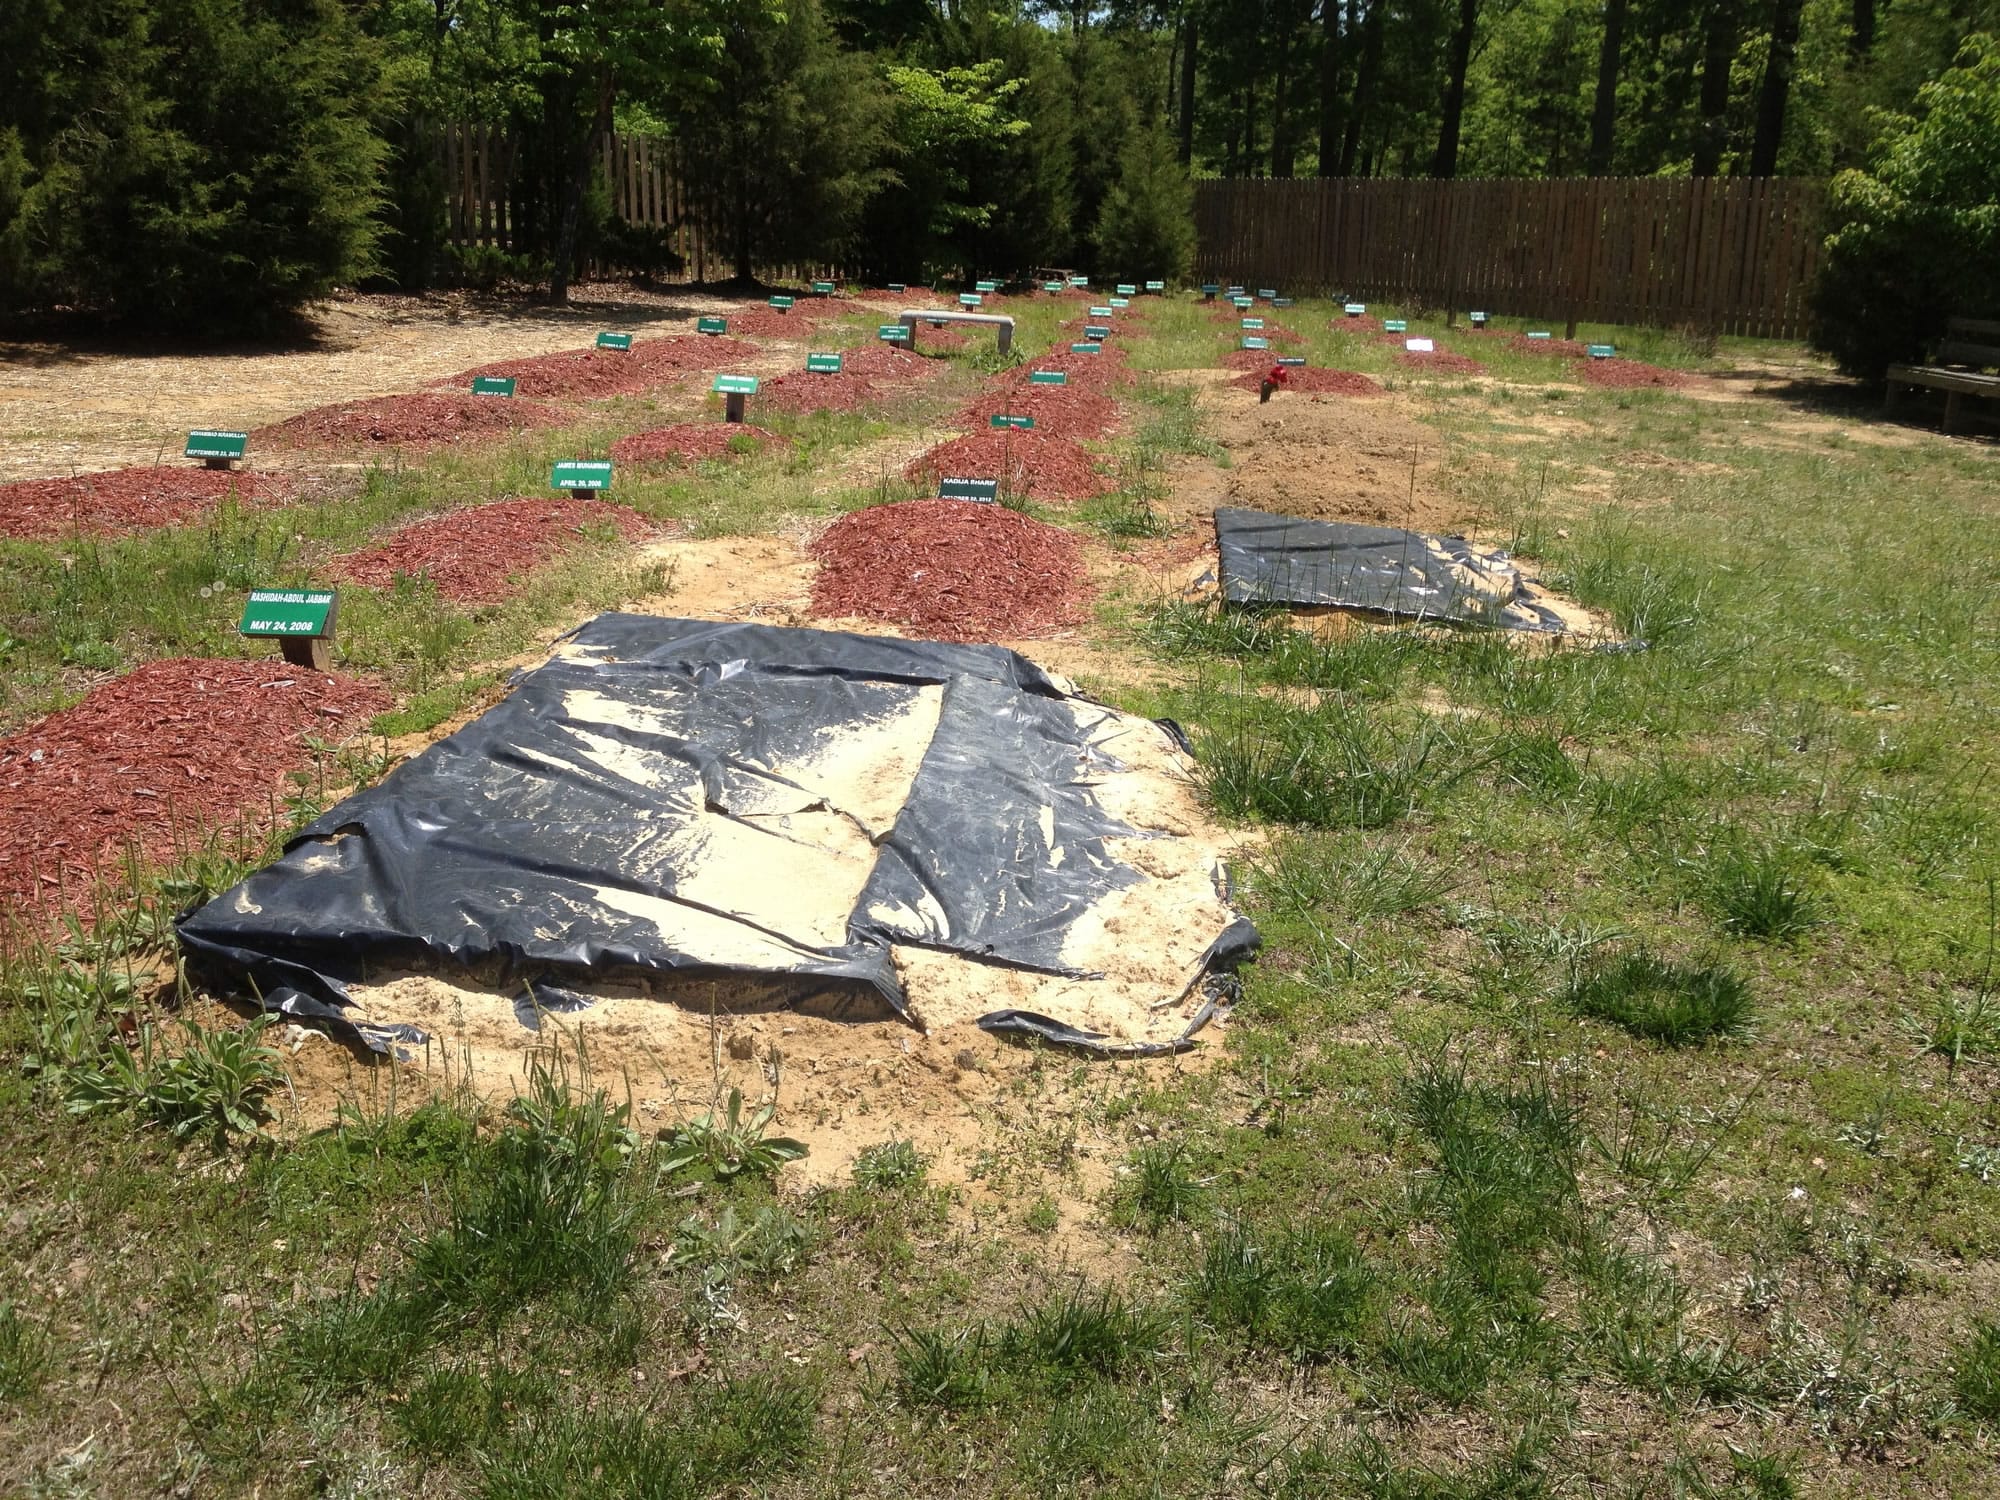 The alleged burial site of Boston Marathon bombing suspect Tamerlan Tsarnaev is covered in Doswell, Va. on Friday. Ruslan Tsarni, the uncle of Tamerlan Tsarnaev, said Tsarnaev was buried in the cemetery in Doswell, near Richmond. Tsarnaev was killed April 19 in a getaway attempt after a gunbattle with police.